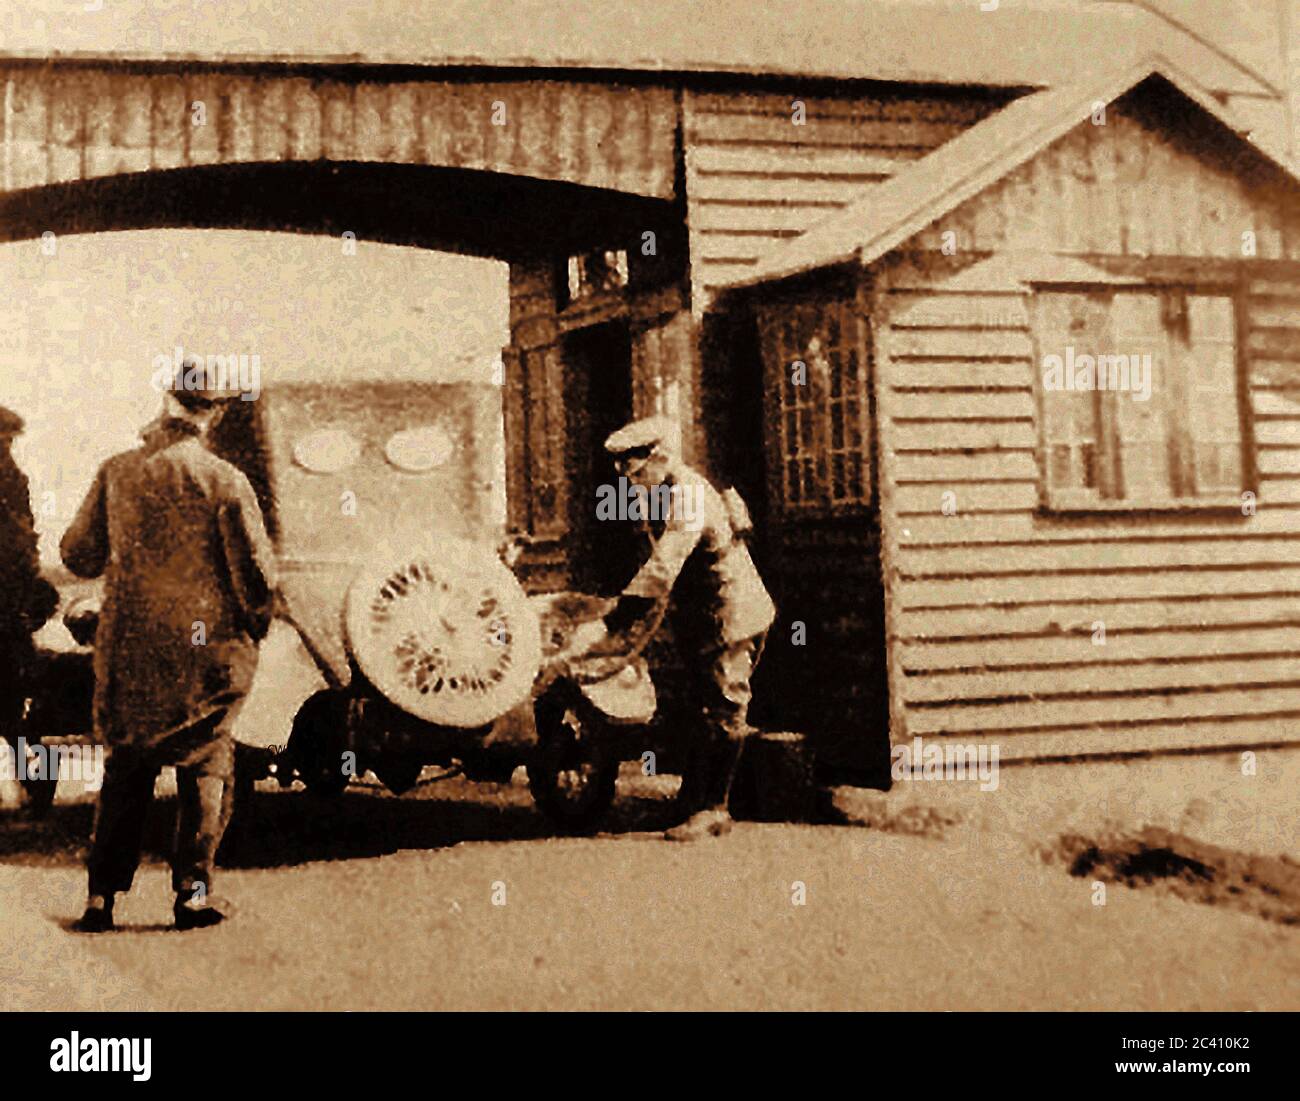 The first motorist's filling station in England was officially opened in November 1919 at Aldermaston, Berkshire by the Automobile Association (AA) to promote  British-made coal-based  benzole fuel  as opposed to Russian Petrol. It was sold at cost price to members of the AA. The single hand-operated pump, was operated by an AA patrolmen in full uniform. The unmarked site is now in a  lay-by on the A4 Bath Road, Stock Photo